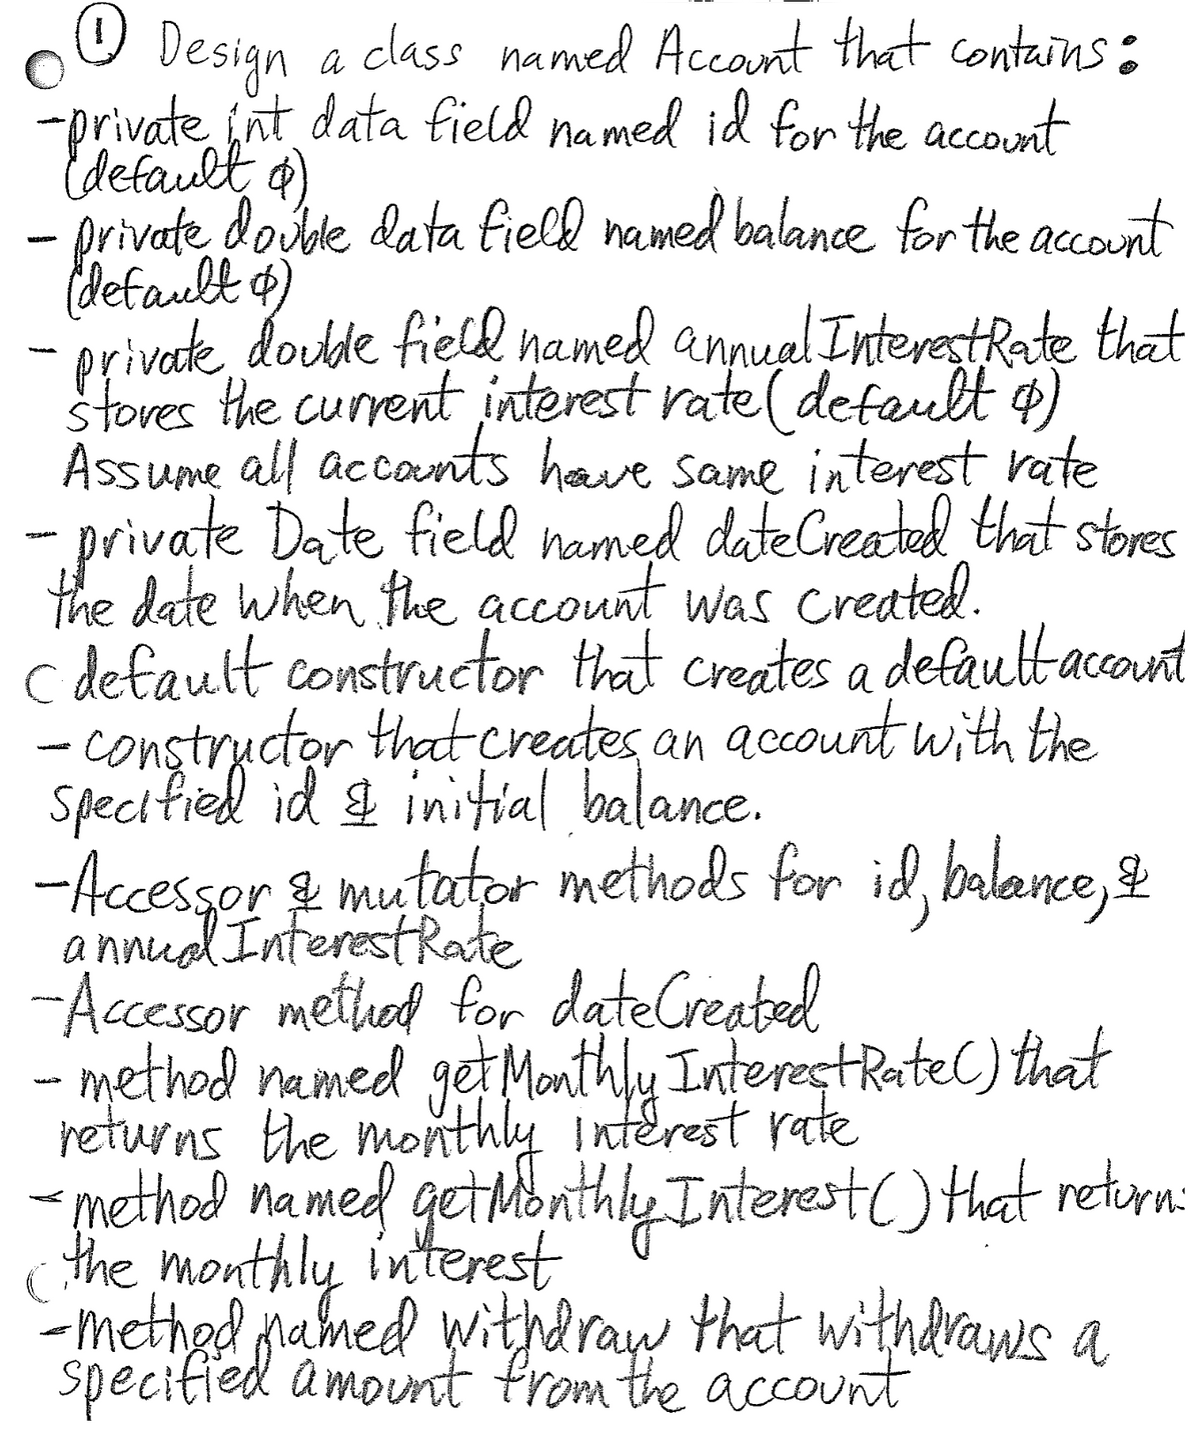 class named Accant that contains:
Design
-private jnt data field named id for the account
default a)
- private dosole data fielk named balance for the account
default o)
- privake, doulde fiell named annuel InterestRate that
stores the current interest rate( default o)
Assume all accants have same interest rate
-private Date field named dateCreated that stores
the date when the account was created.
c default constructor that creates a defauttaccont
- constructor that creates an account with the
specified id & initial balance.
a
& mutator methods for id, balance, &
a nnud InterestRate
-AccessorterestRate
-Accessor method for dateCreated
- method named get Monthly InterestRateCC) that
returns the monthly interest rate
- methal named gethbnthly Interest() that retora:
the interest
monthly
-methed named witdray that withdraws a
Specified amount from the account
